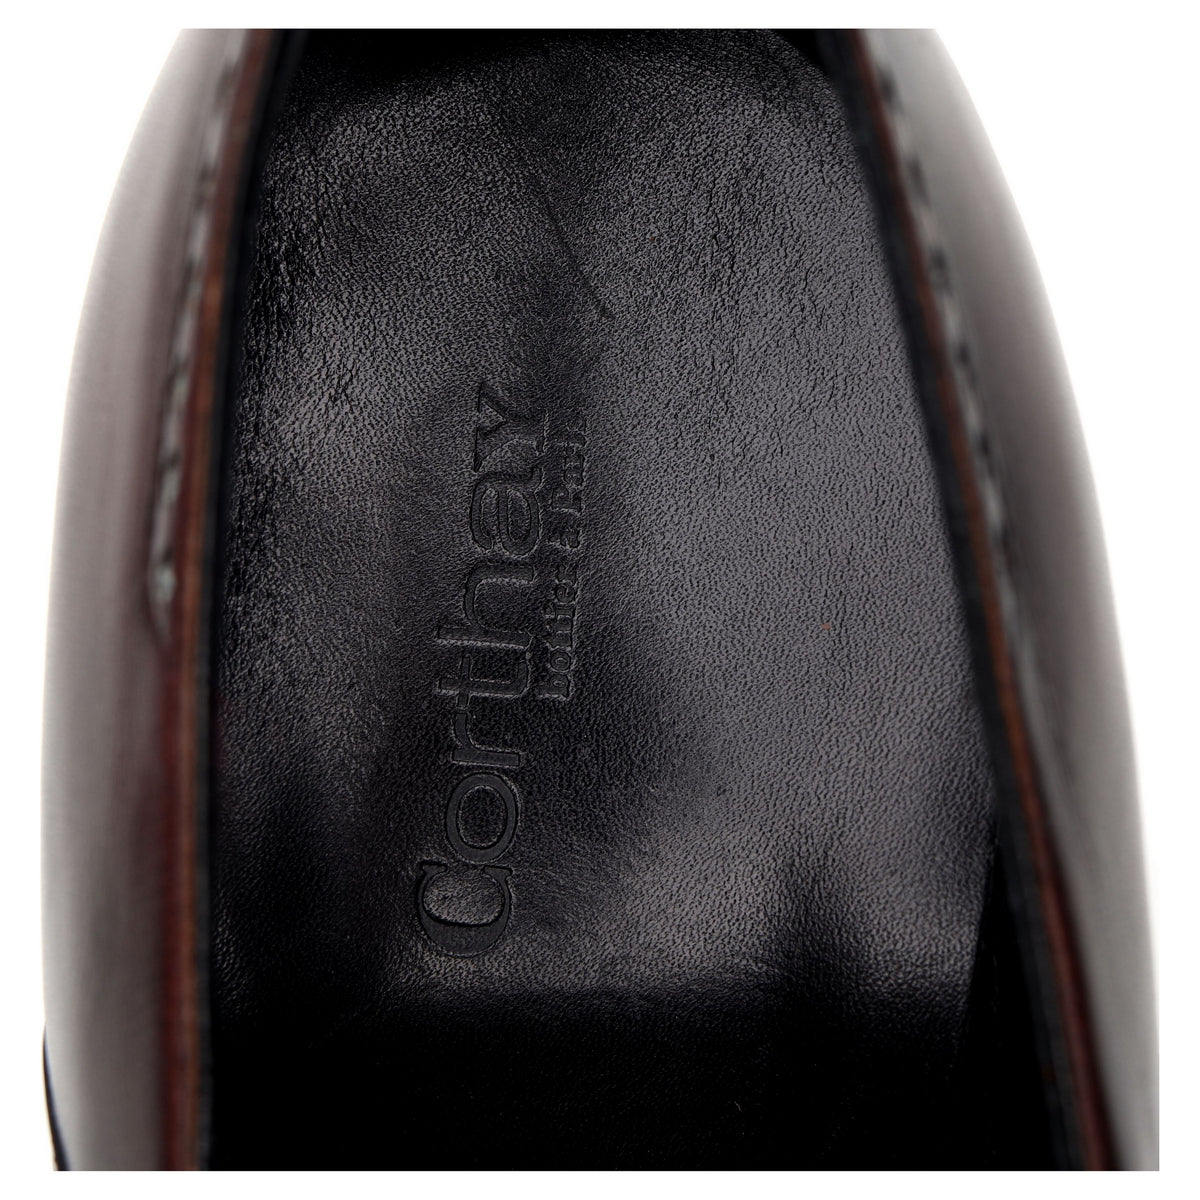 &#39;Lubia&#39; Black Red Leather Derby UK 6